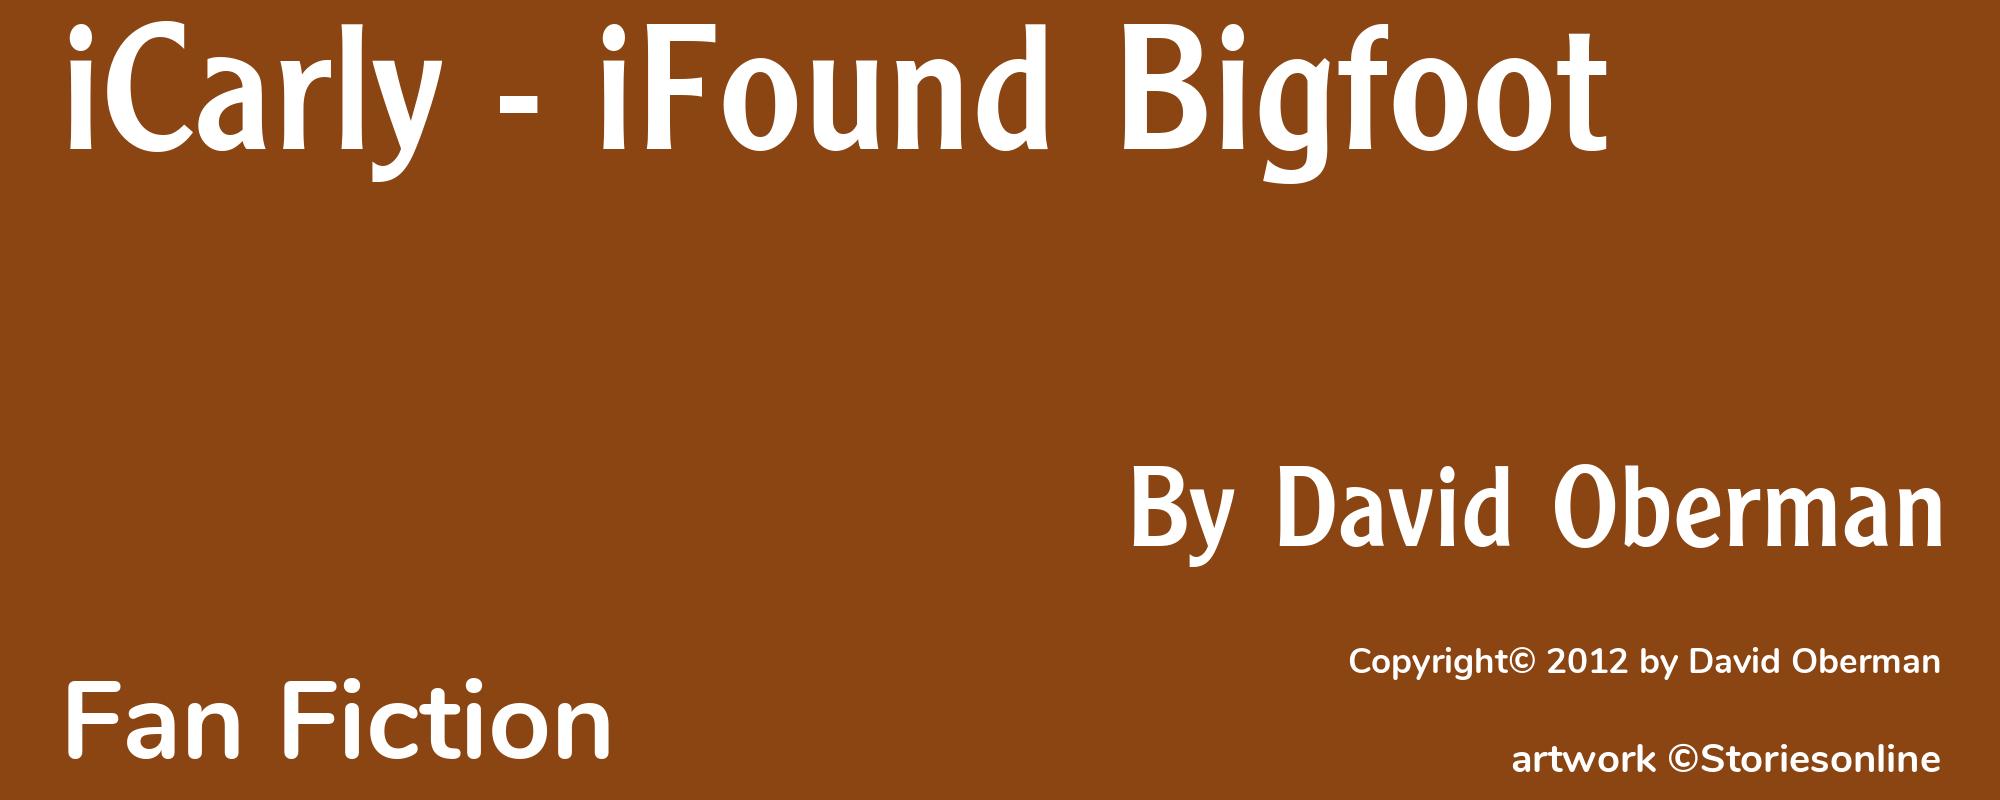 iCarly - iFound Bigfoot - Cover